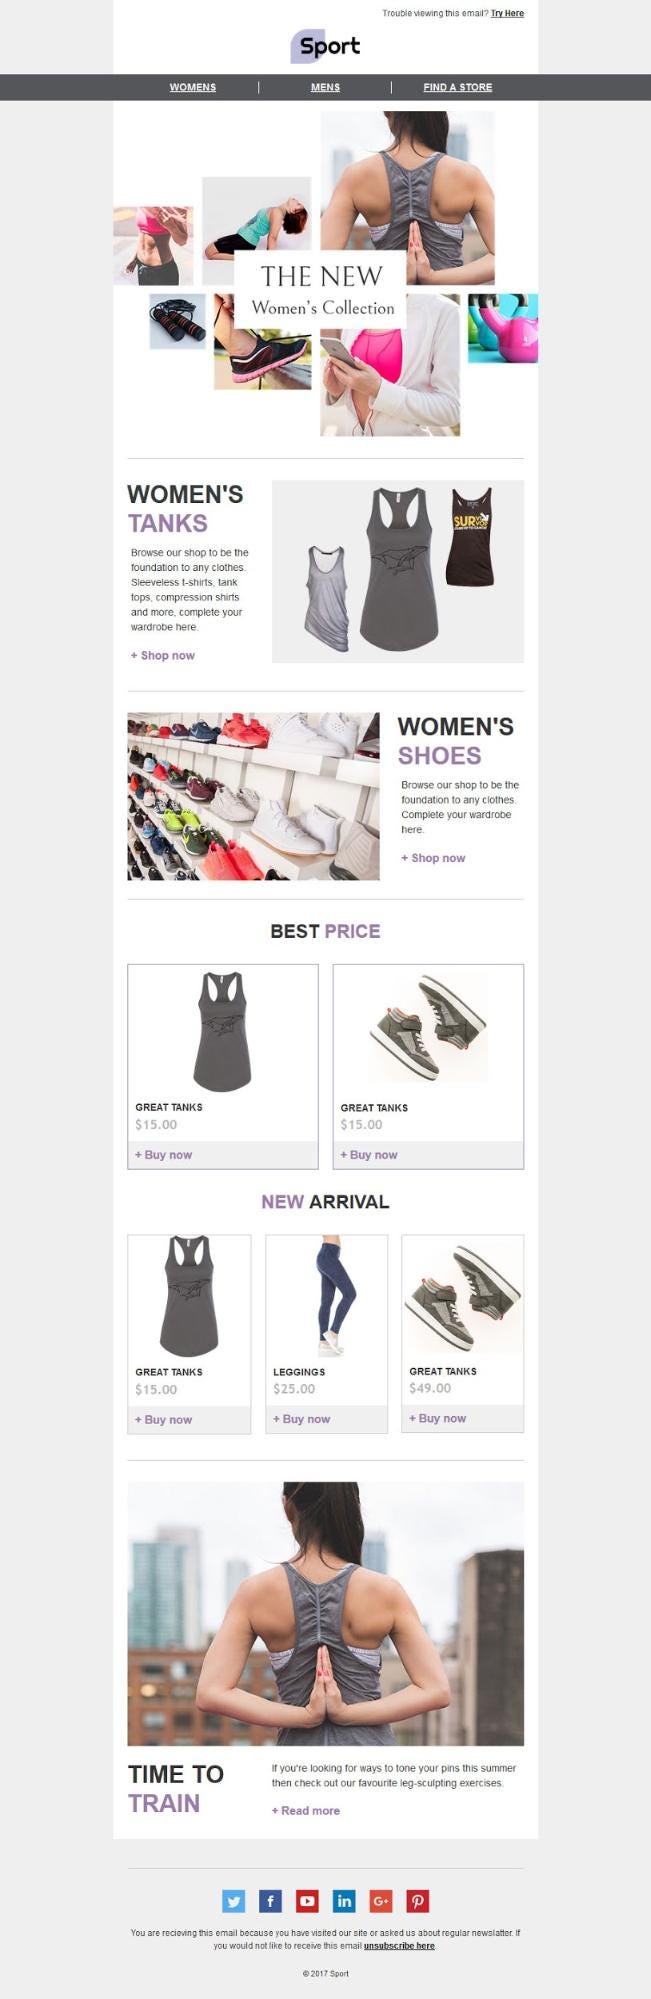 Amazing Outfits  Email design inspiration, Email marketing layout